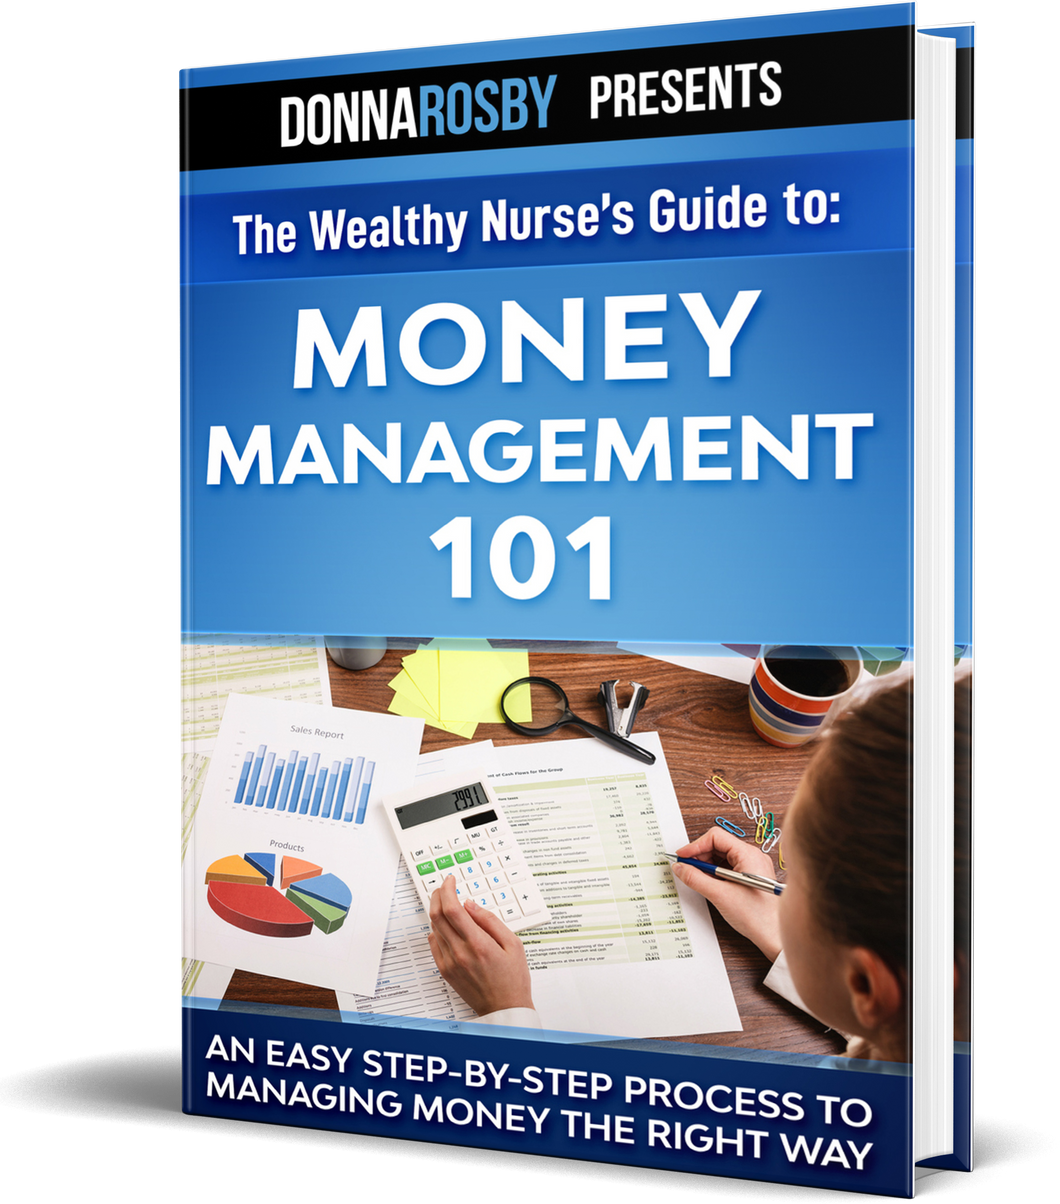 Money Management 101: An Easy Step-by-Step Process To Managing Money the Right Way